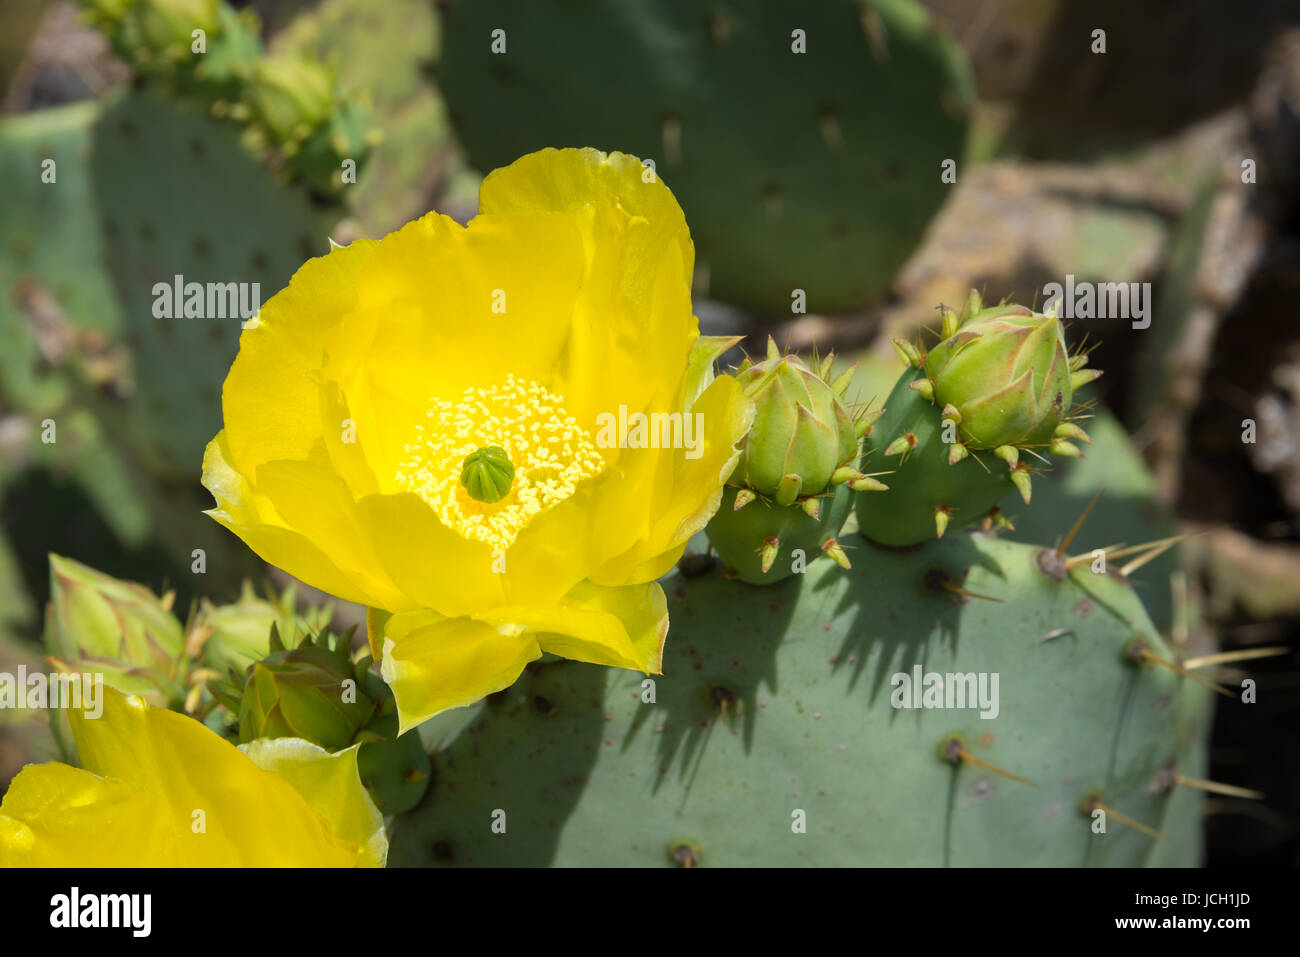 A single, yellow, Prickly Pear cactus (Opuntia humifusa) flower in full bloom. Stock Photo